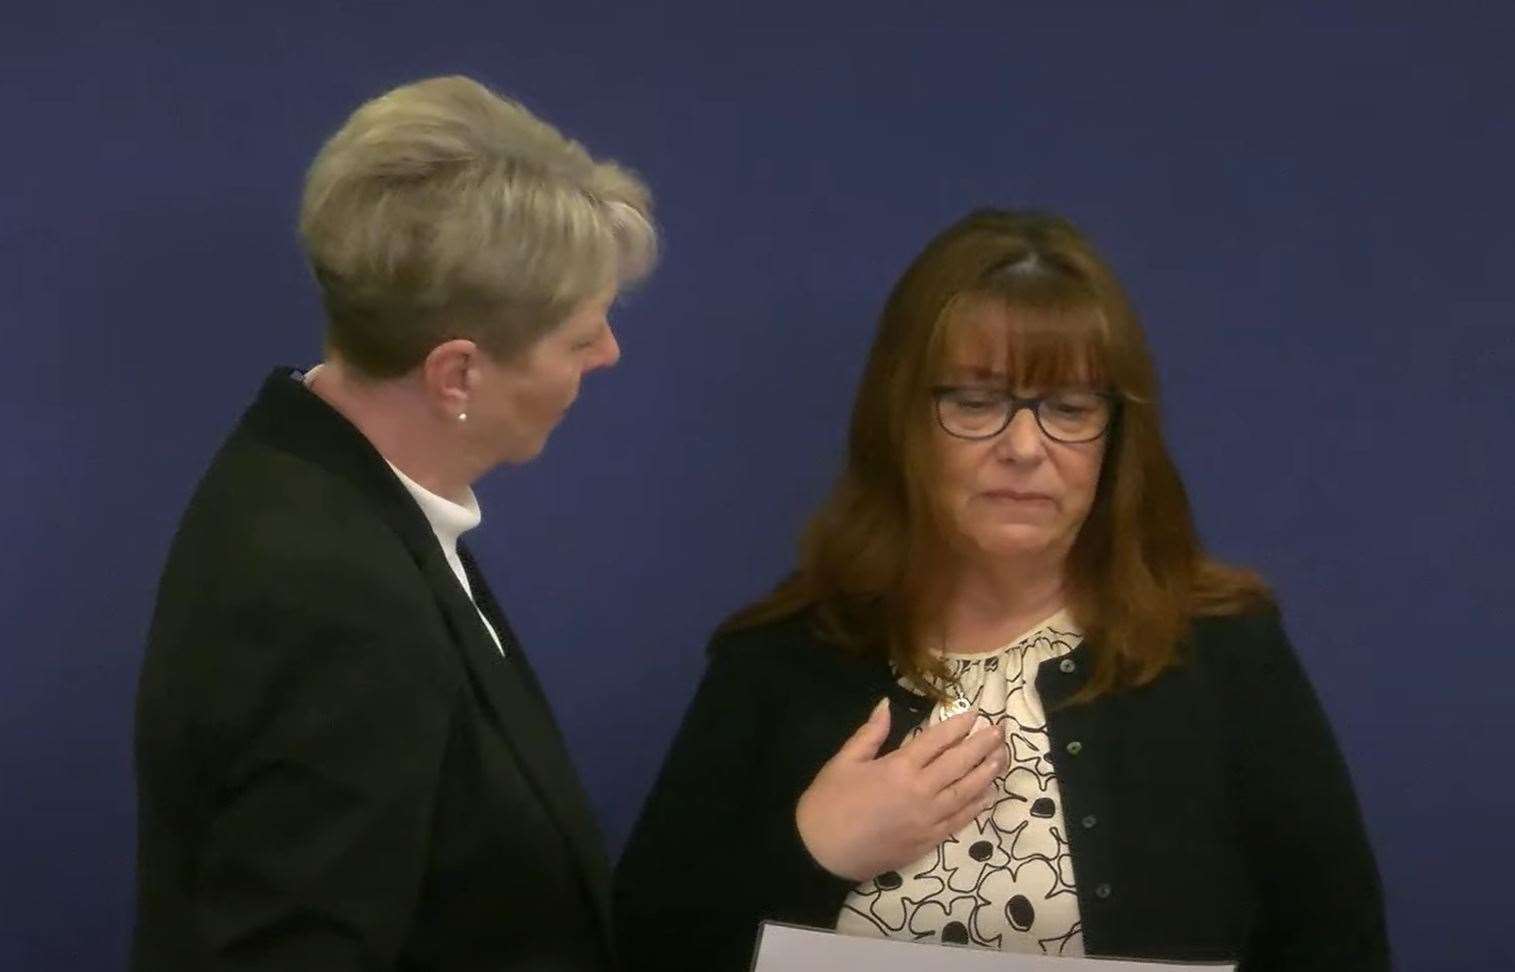 Former head of IT Lesley Sewell was tearful as she took an oath ahead of her evidence on Thursday (Post Office Horizon IT Inquiry/PA)